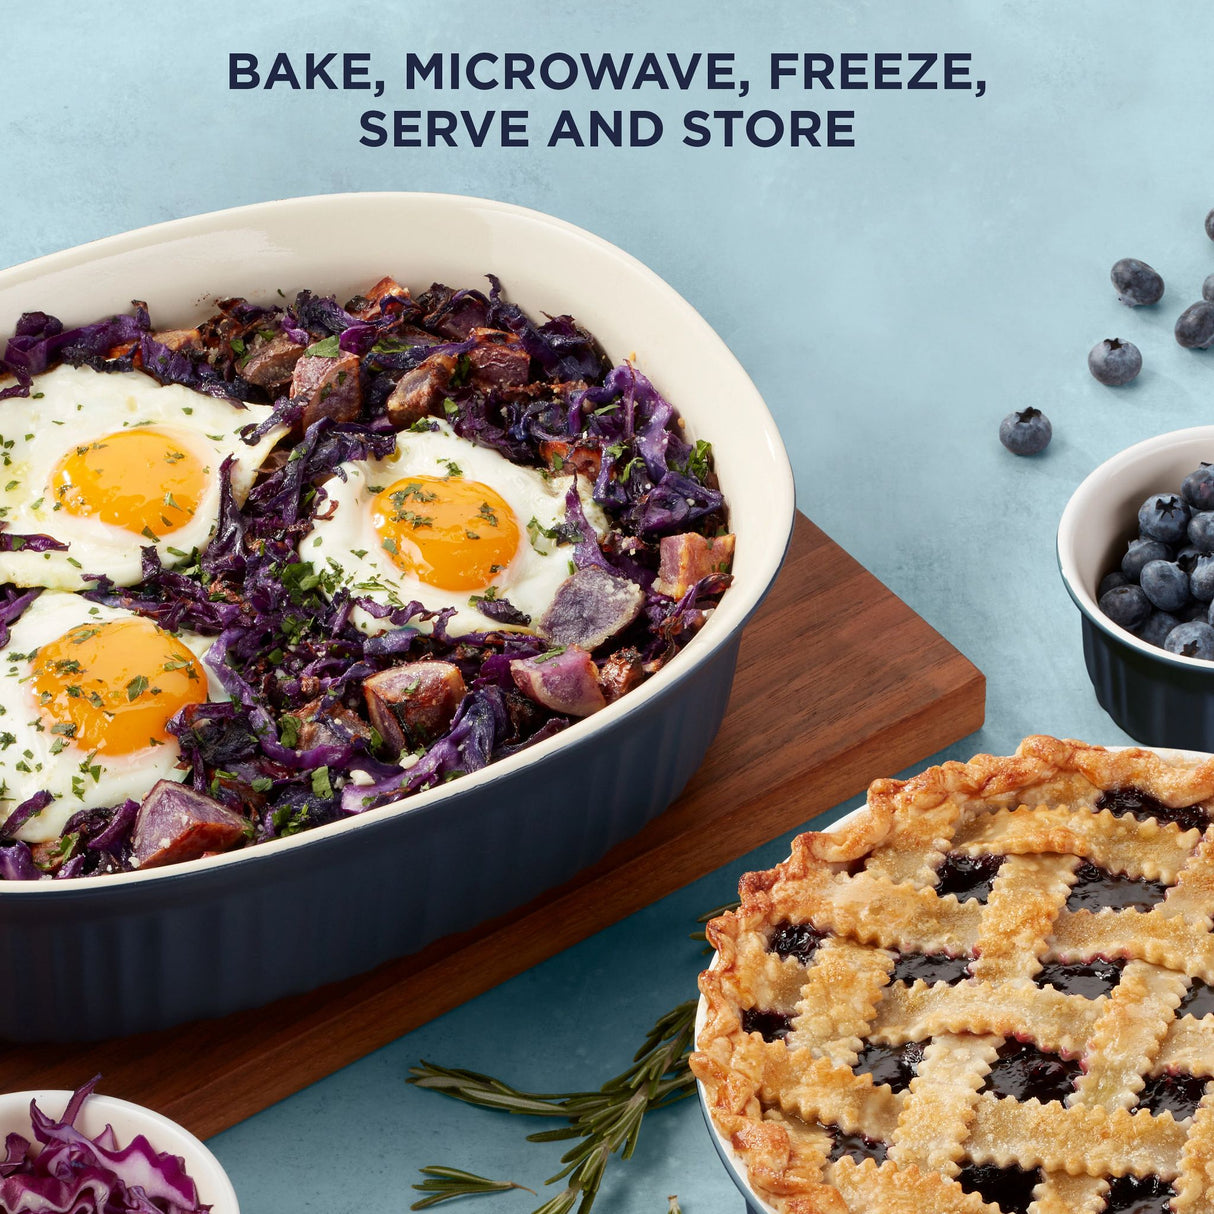  French Colors Oval Bakeware, Navy with food inside &amp; text on photo bake, micowave, freeze &amp; store